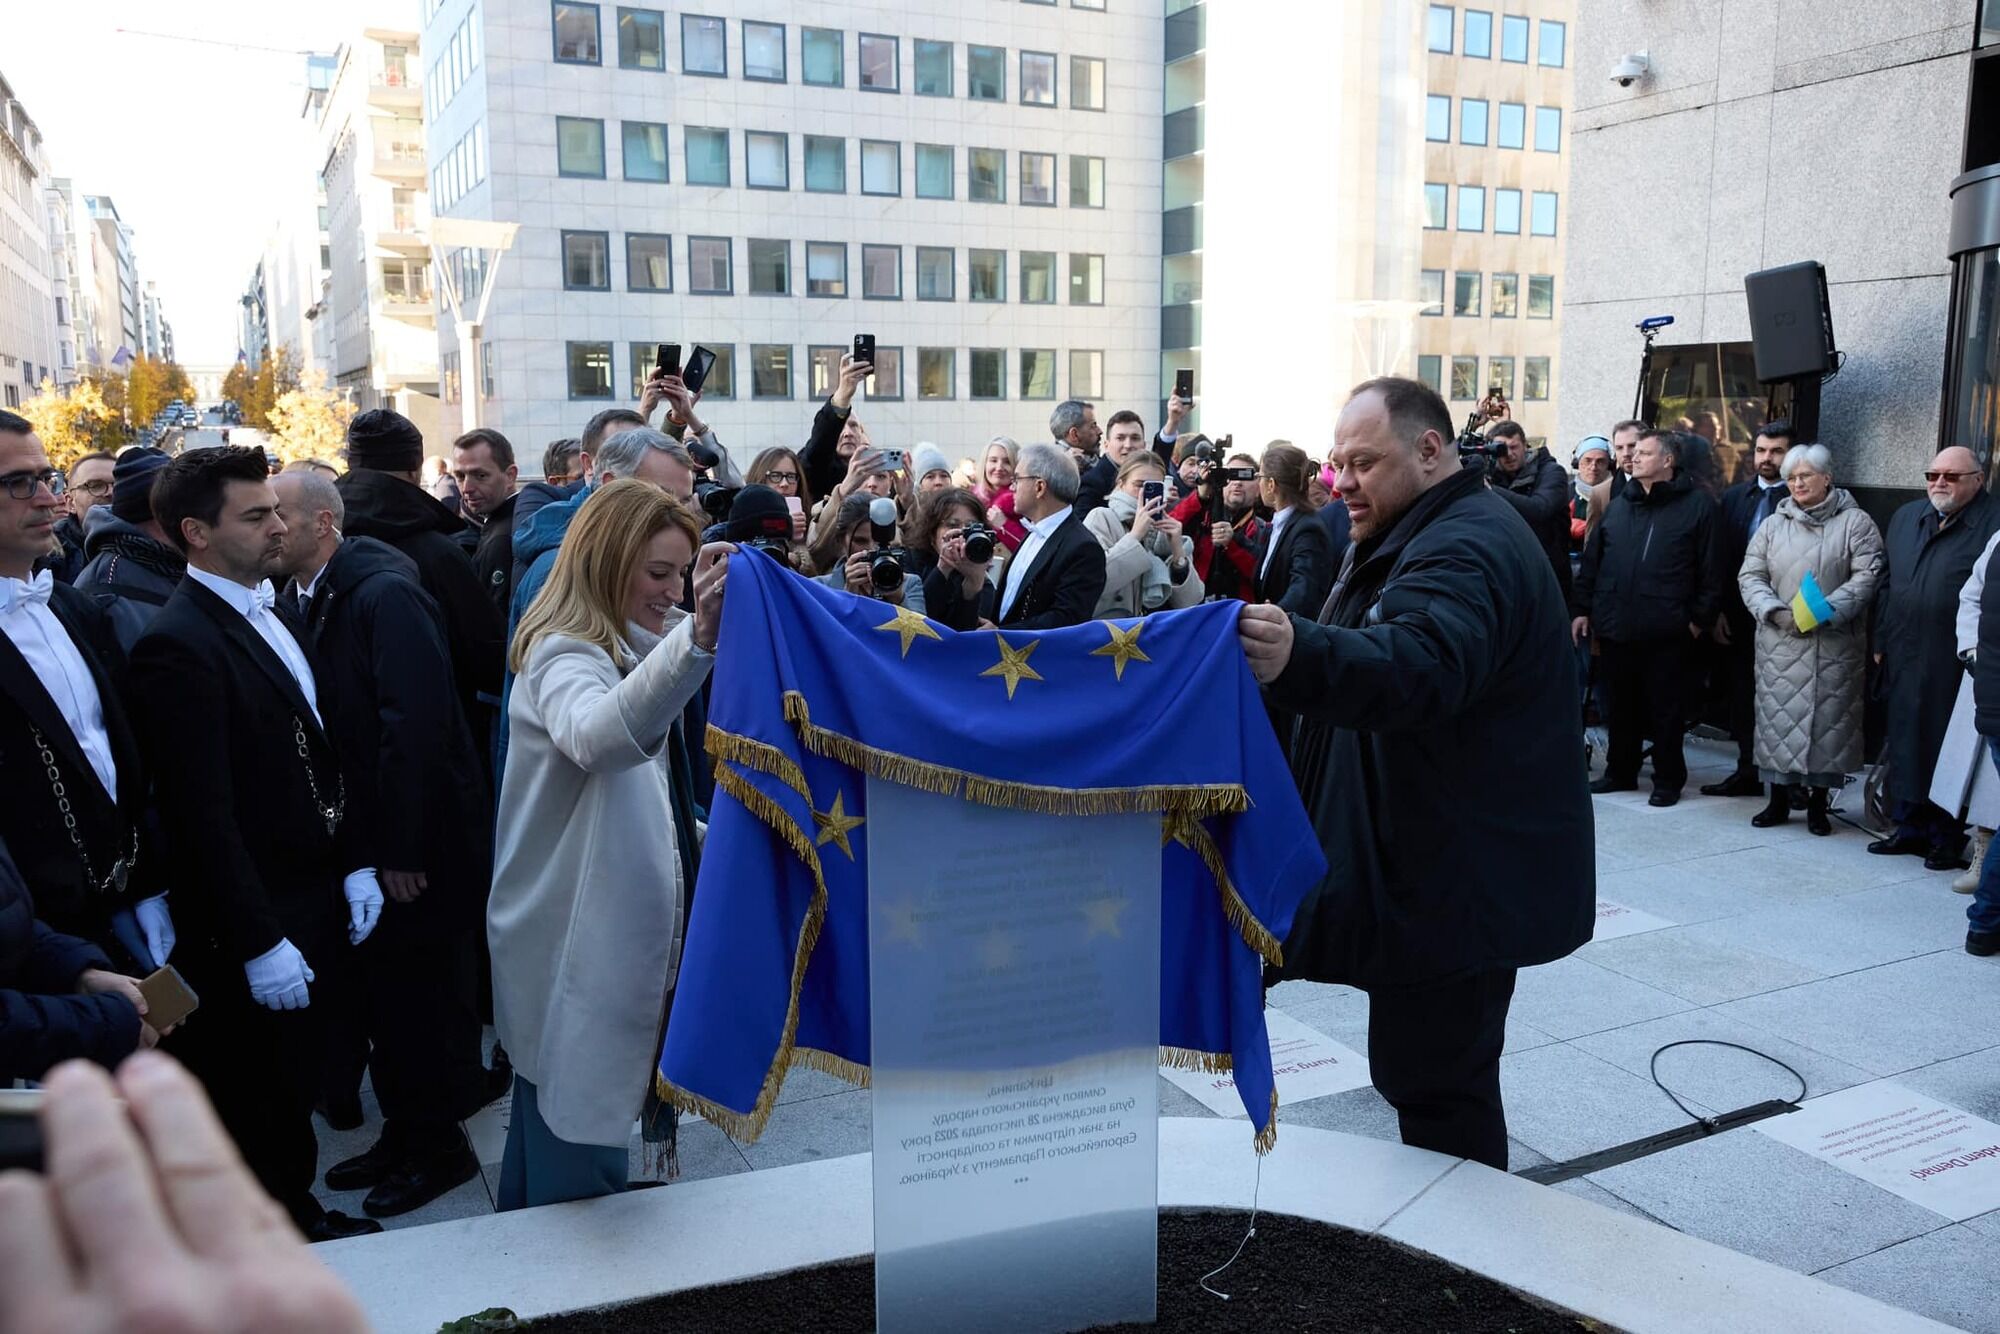 In support for Ukraine: a viburnum bush planted in front of European Parliament building. Photo